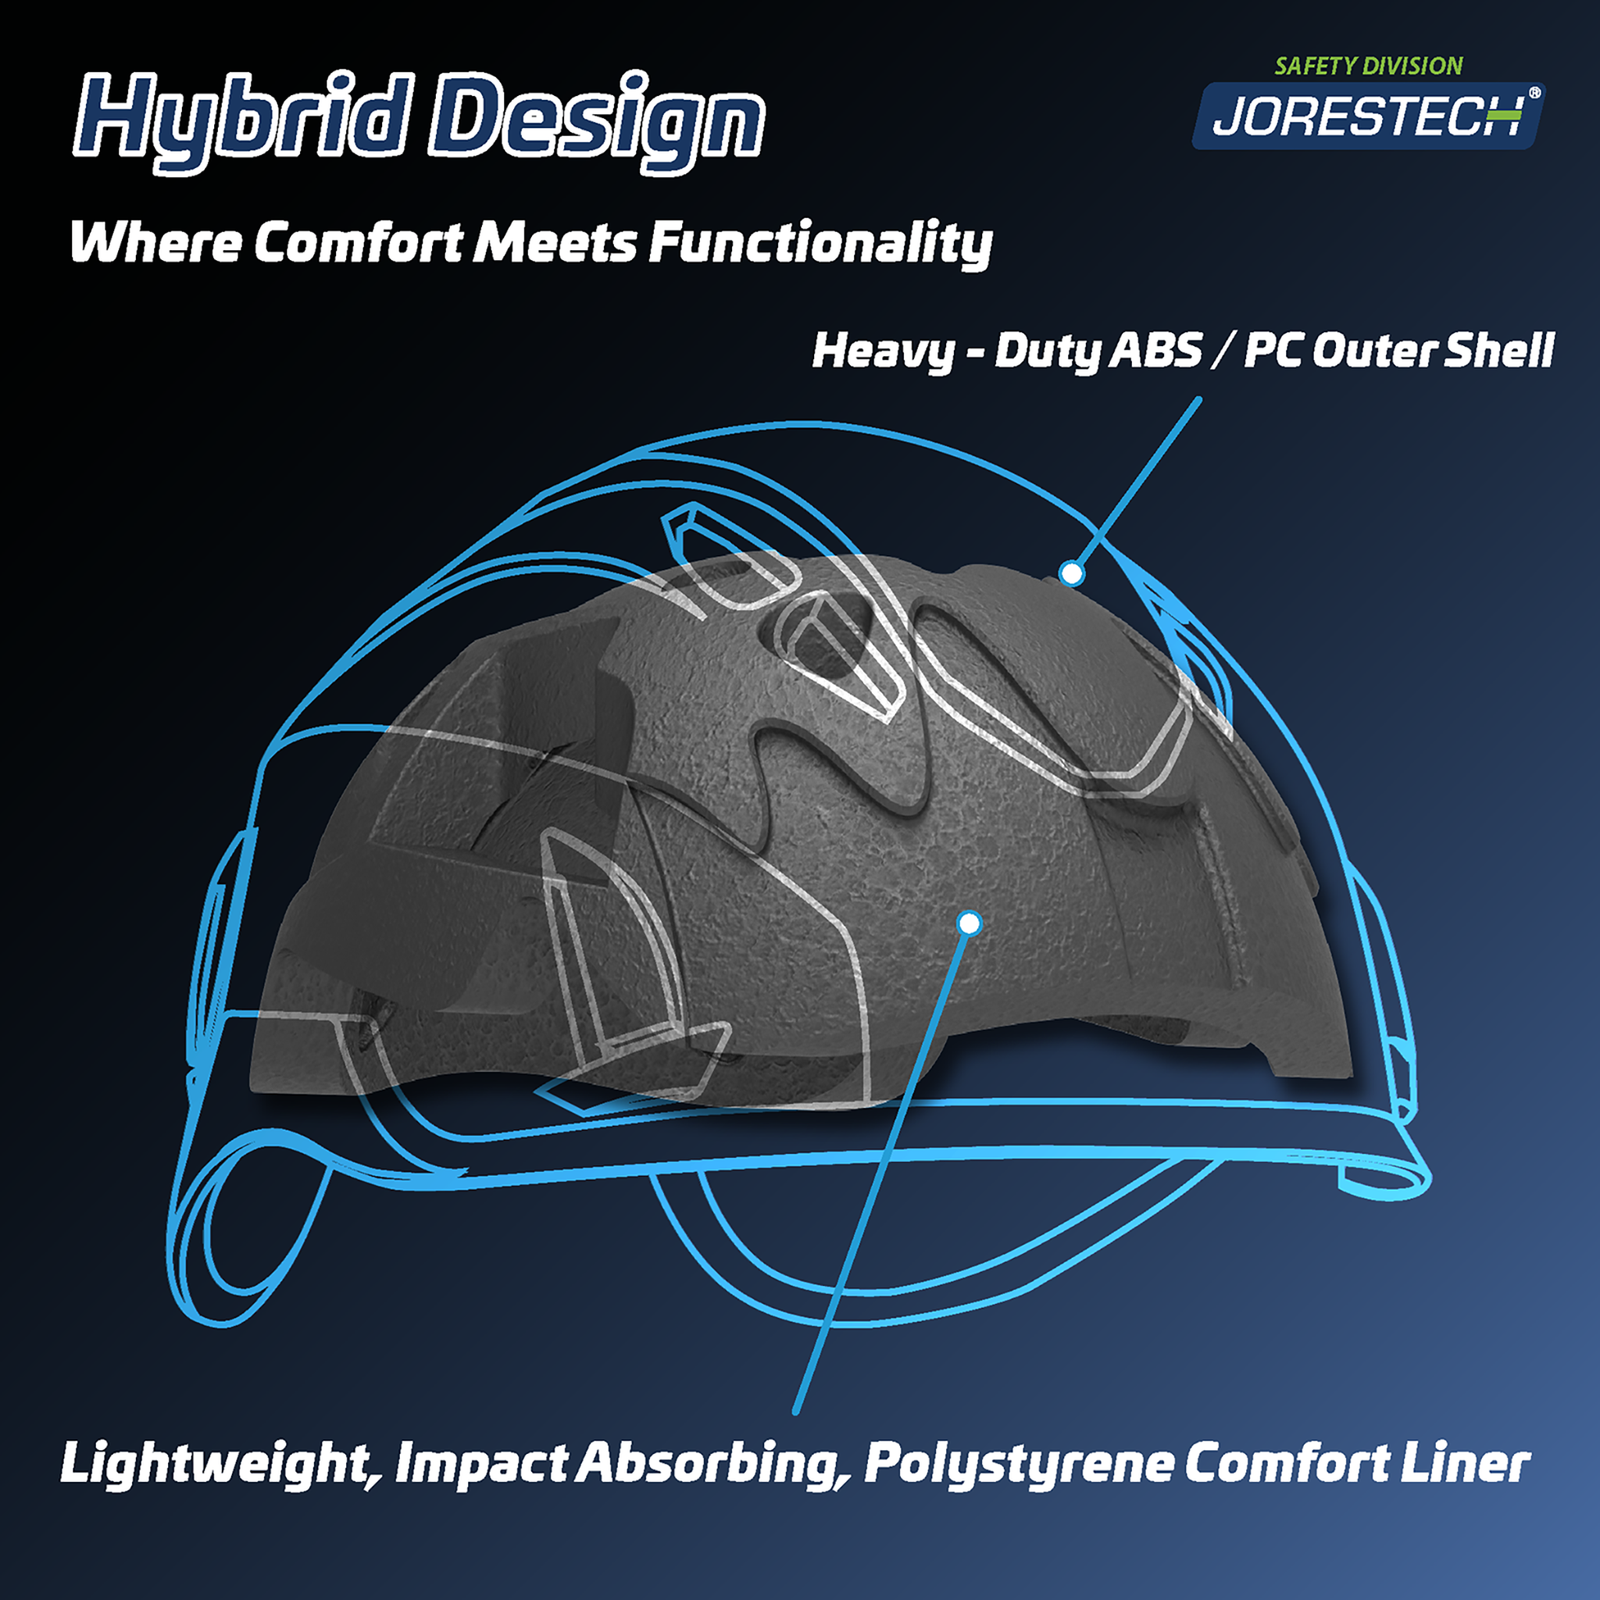 Banner featuring the inner liner that is part of the JORESTECH work at height hard hat, that offers improved protection. Text reads: Hybrid design, where comfort meets functionality . Heavy duty ABS/PC outer shell. Lightweight, impart absorbing, polystyrene comfort liner